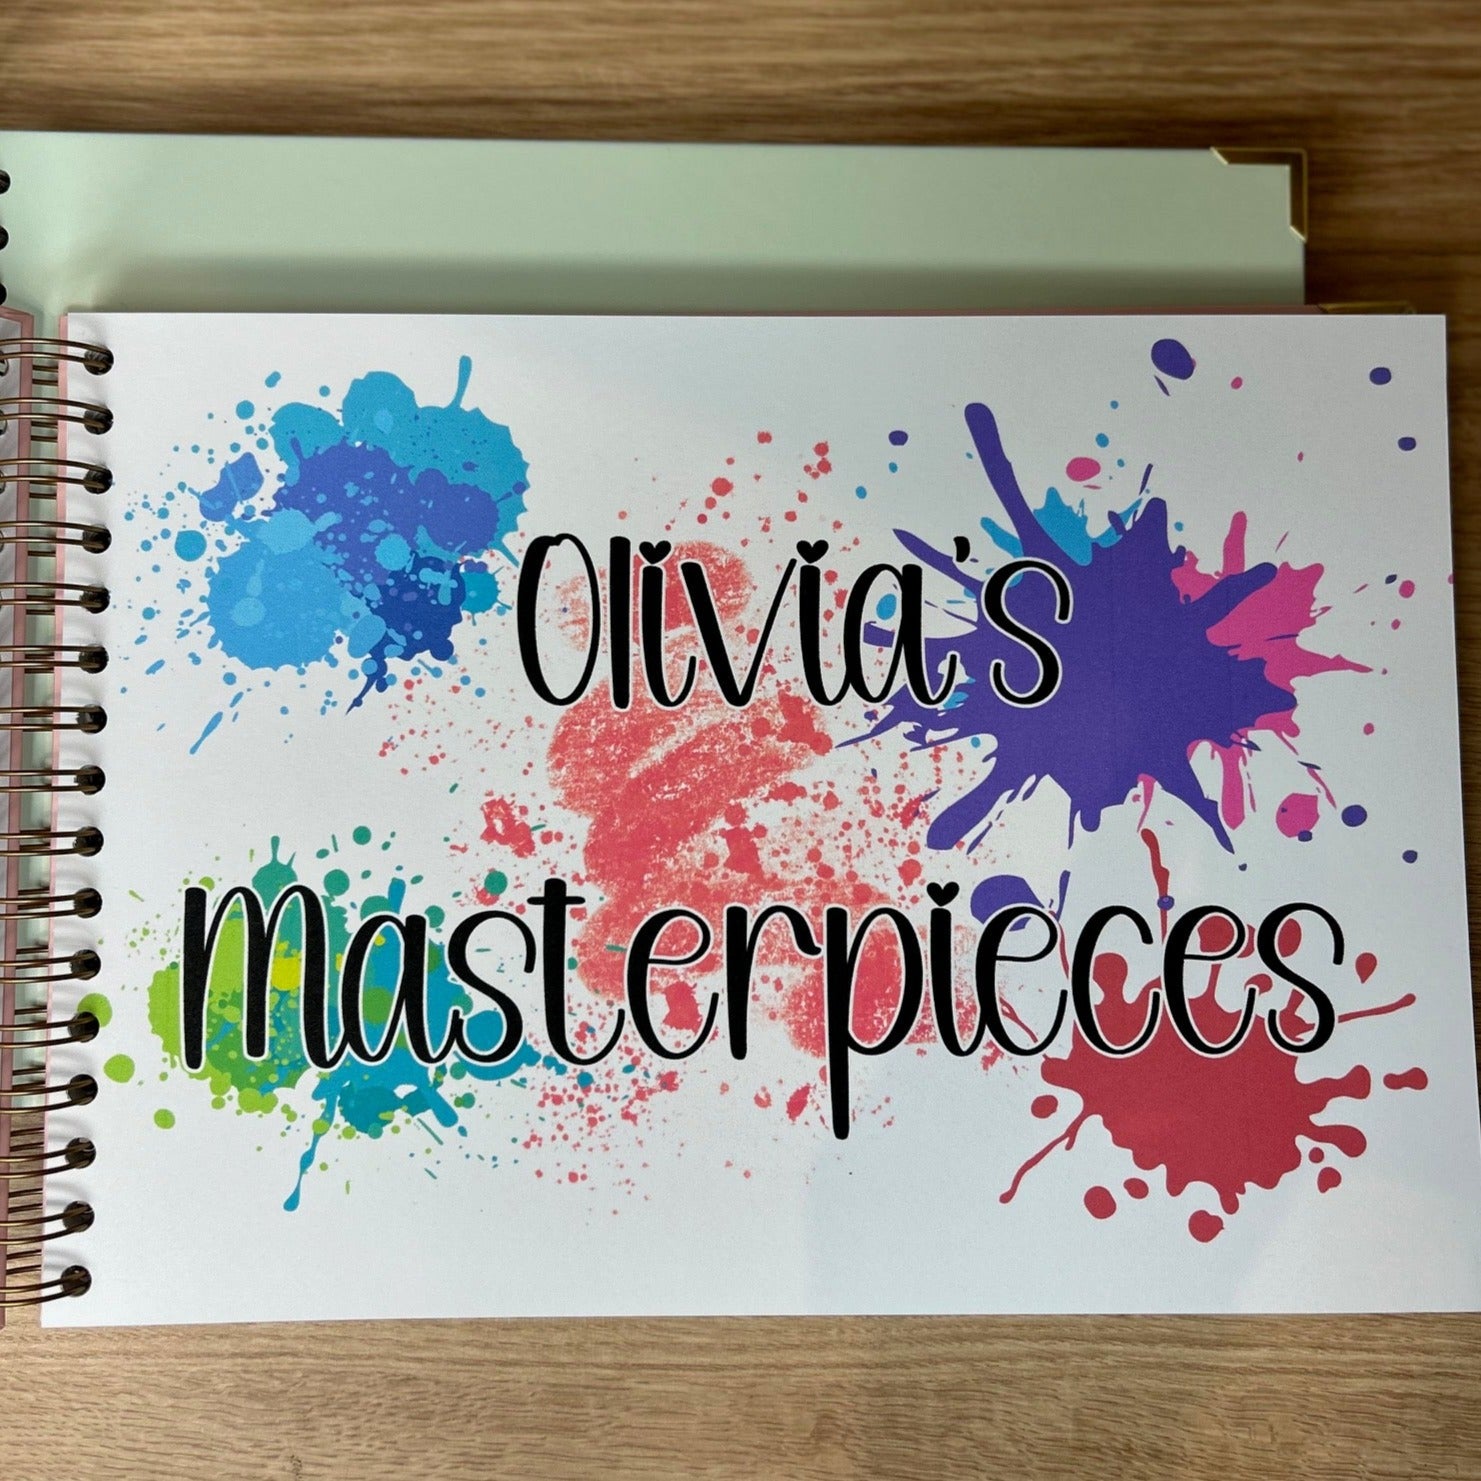 The inside page of the Masterpieces memory book. The page says 'Olivia's Masterpieces in black witing surrounded with multicoloured paint splats